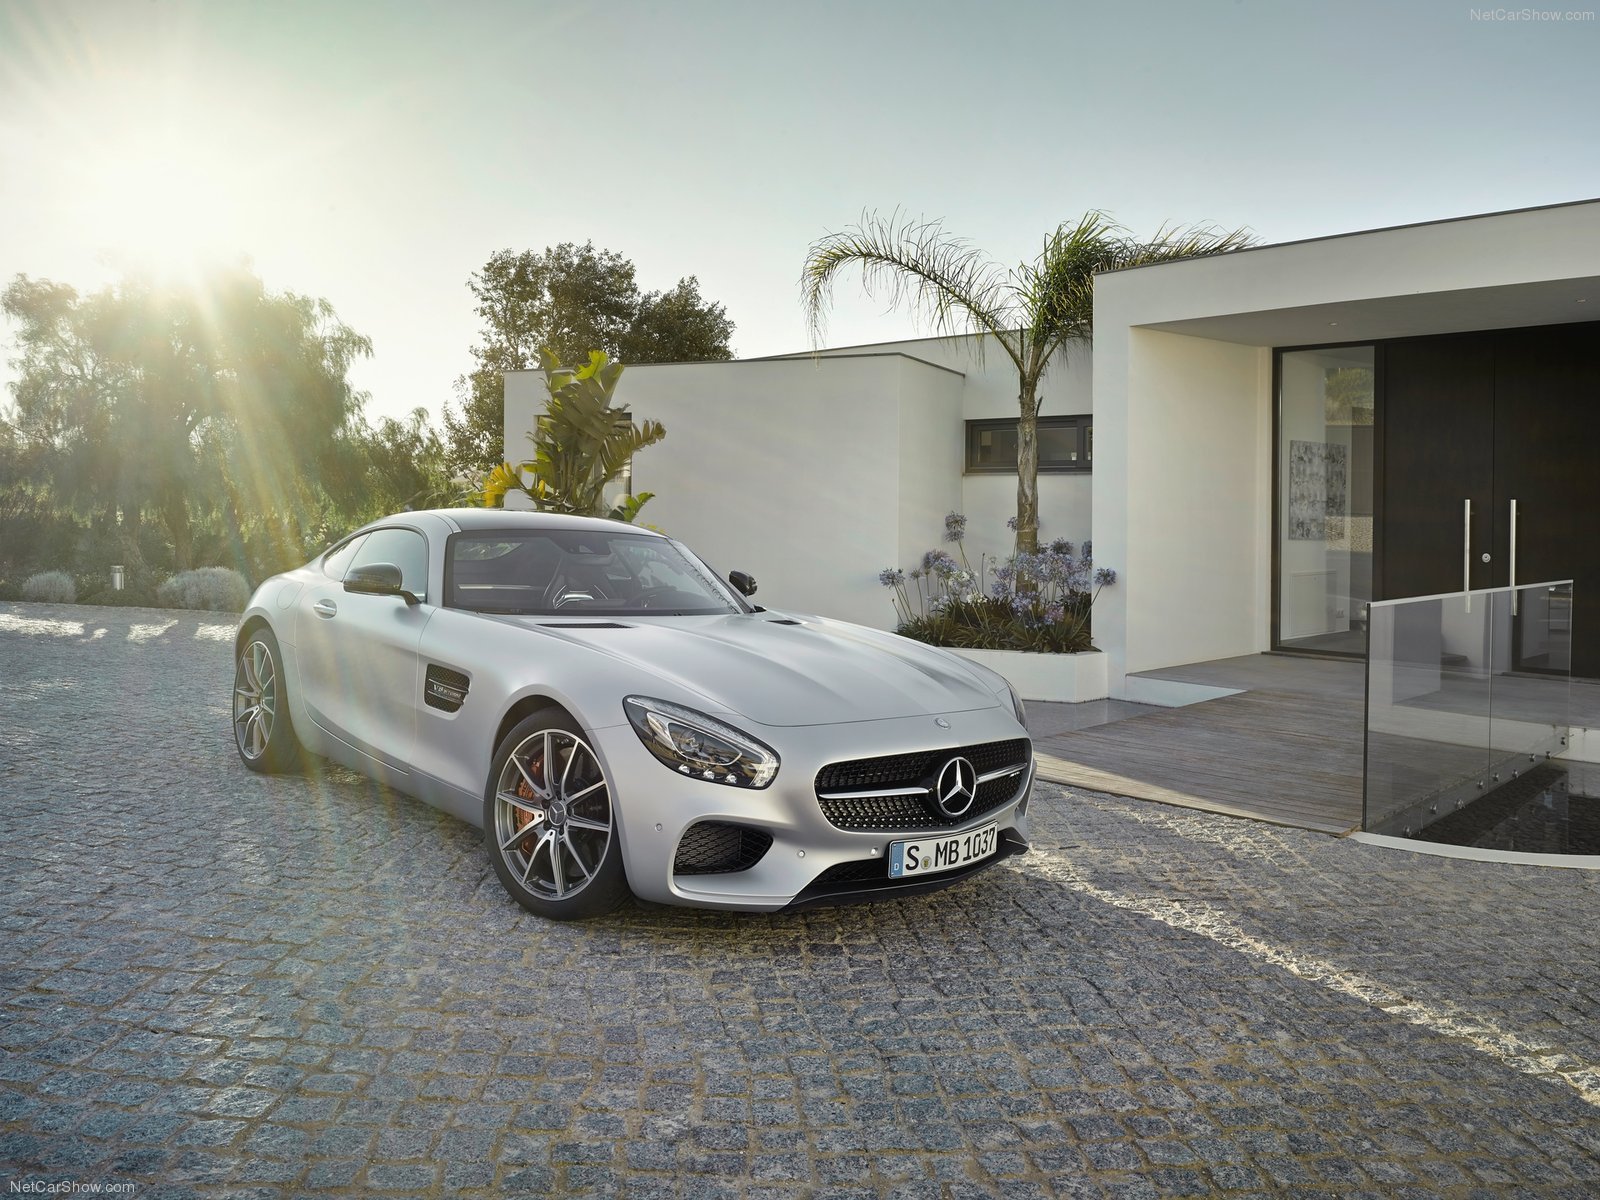 mercedes, Benz, Amg, Gt, Coupe, Cars, 2015, Germany, Gris, Gray Wallpaper